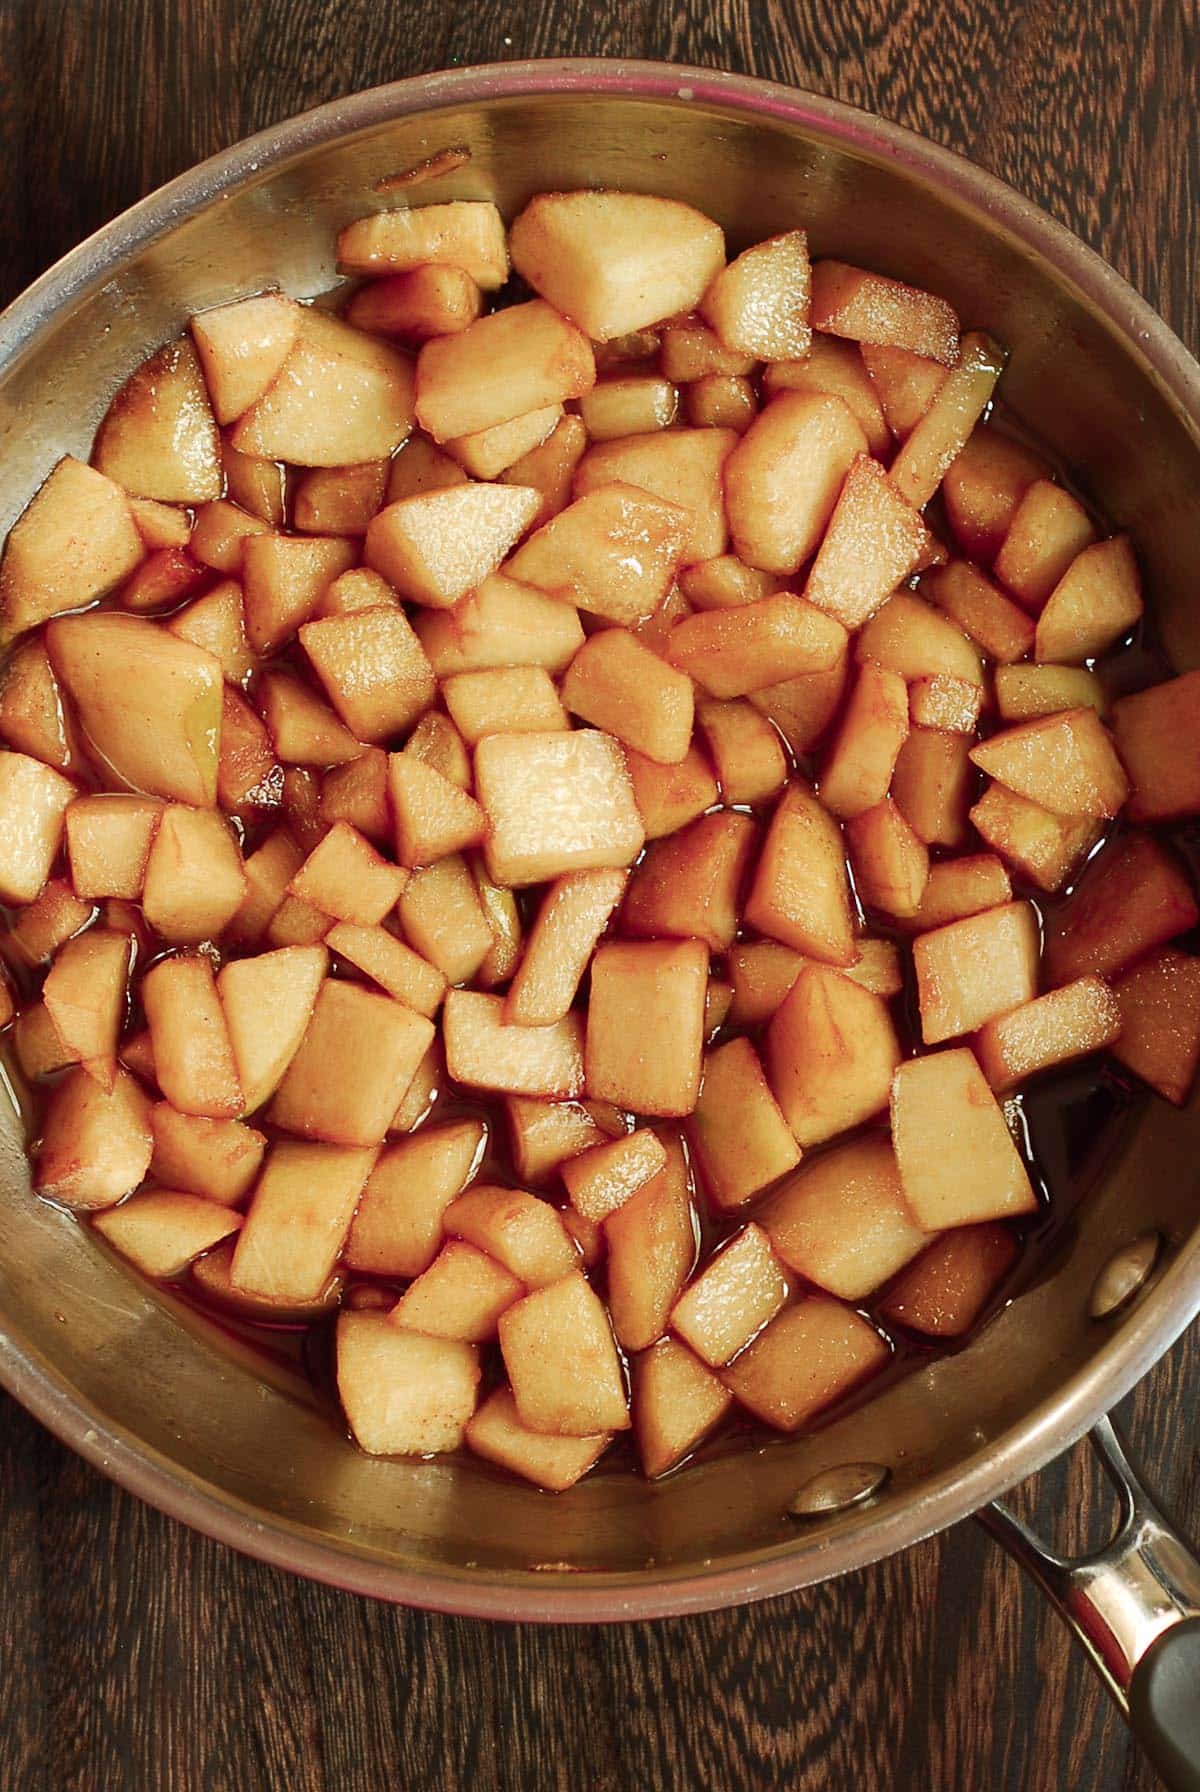 Apples cooked in a small pan